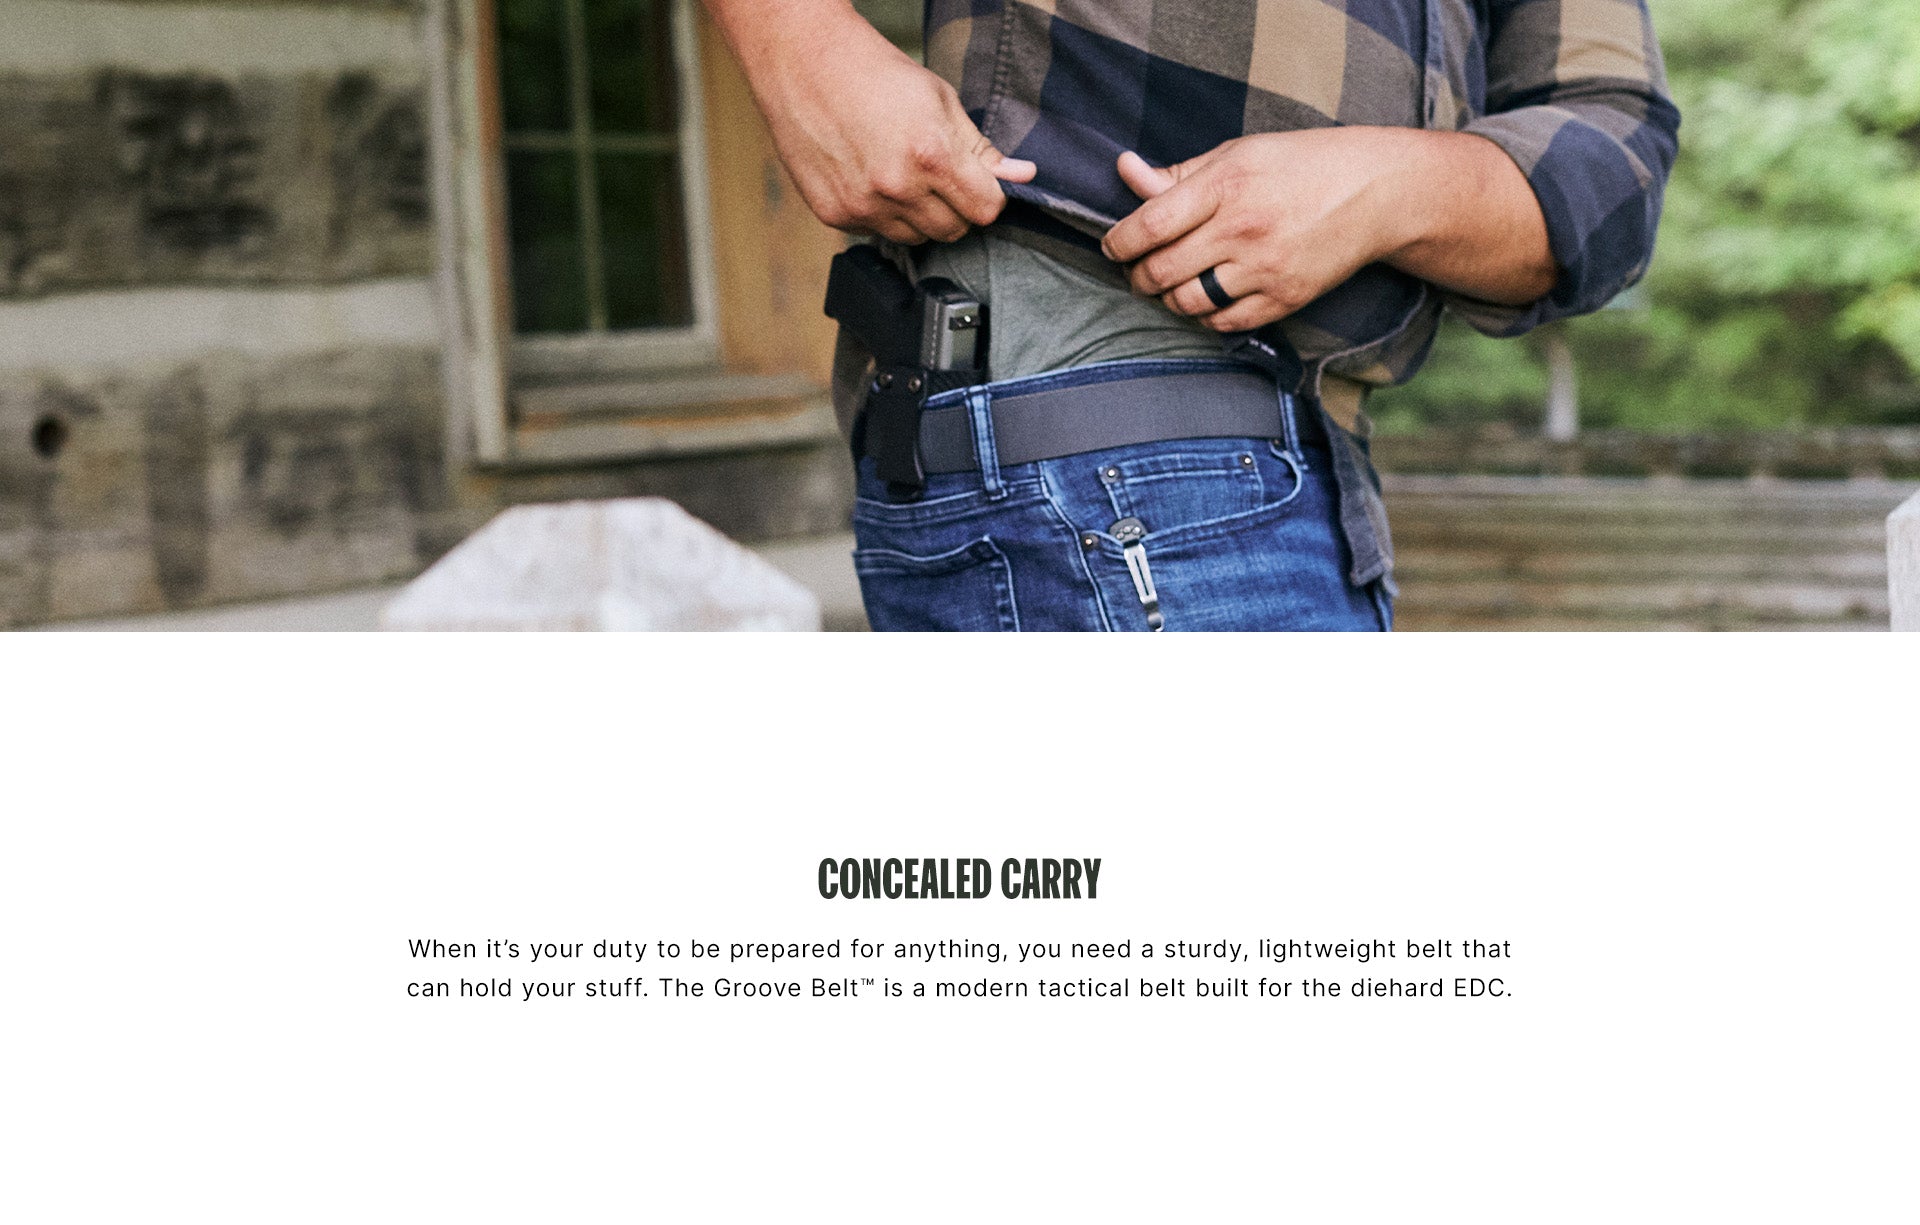 Man using his groove belt to holster his pistol